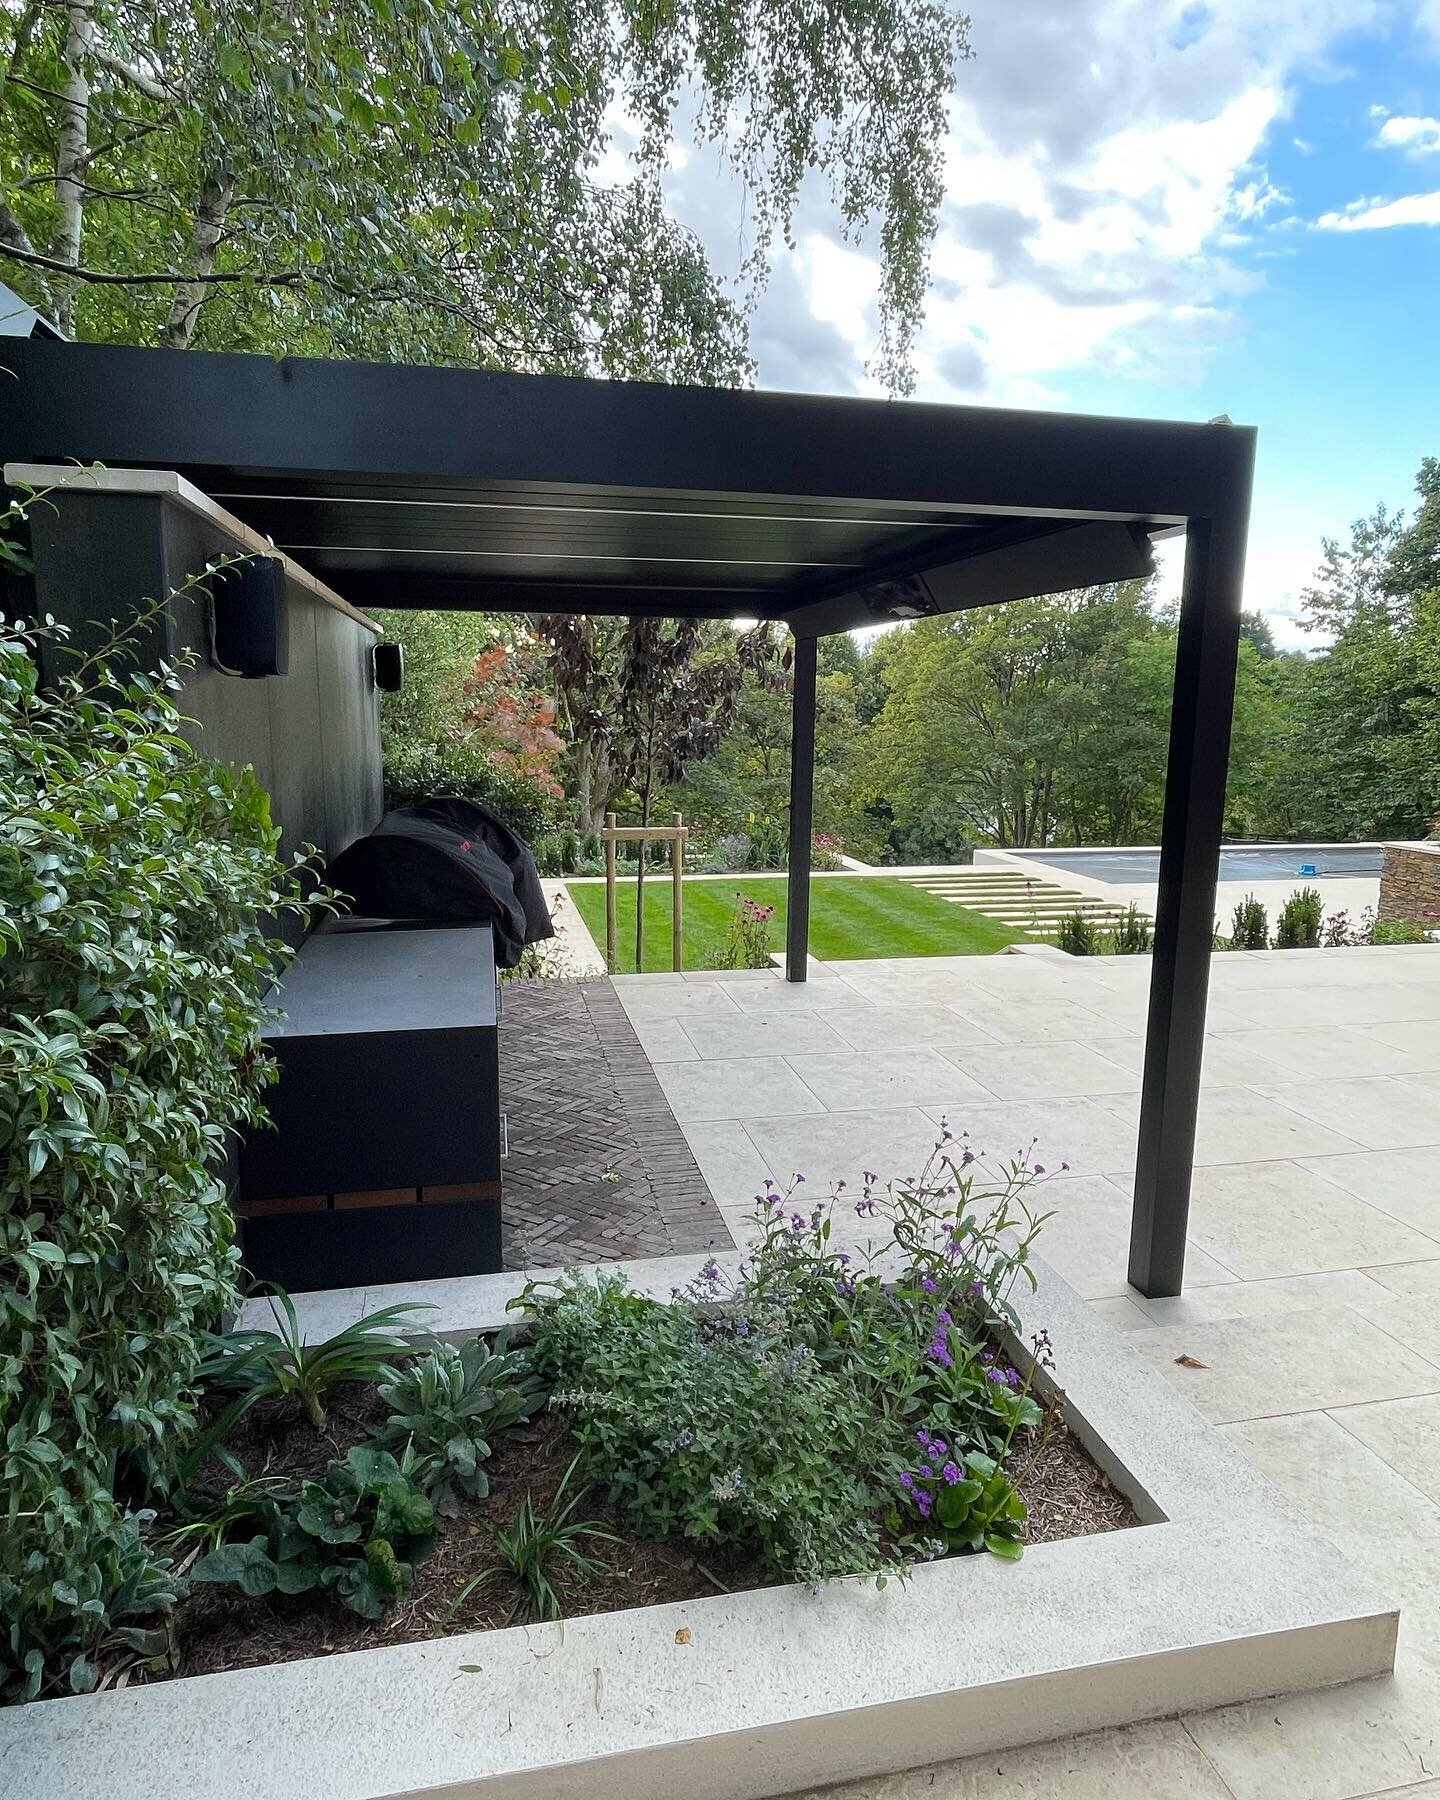 New supply put in for this lovely new louvered pergola. External DB for built in heating and lighting. Hopefully a couple more sunny days to enjoy the recently finished garden! ☀️